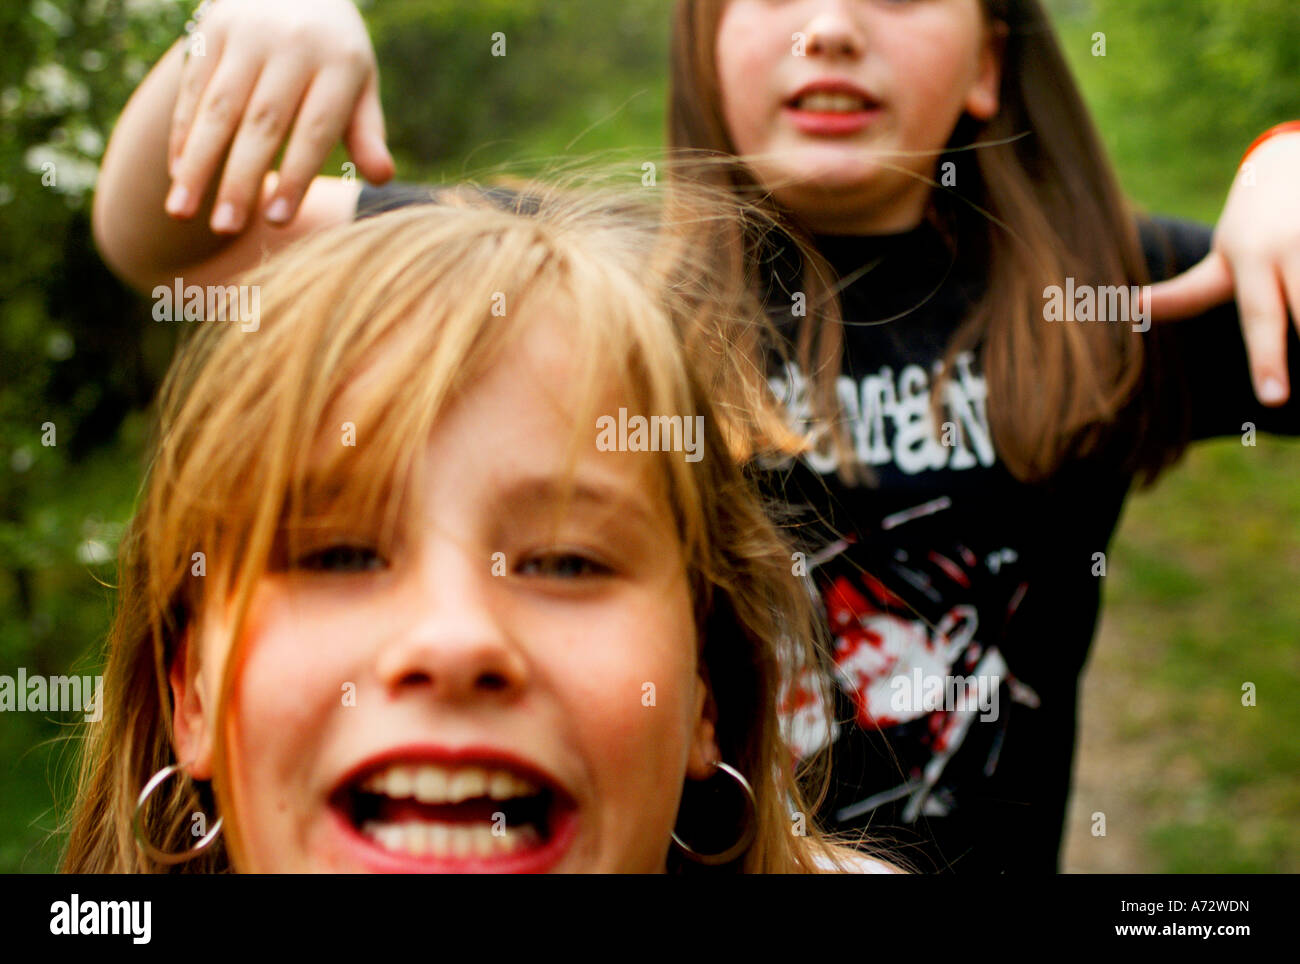 two children playing and messing about Stock Photo